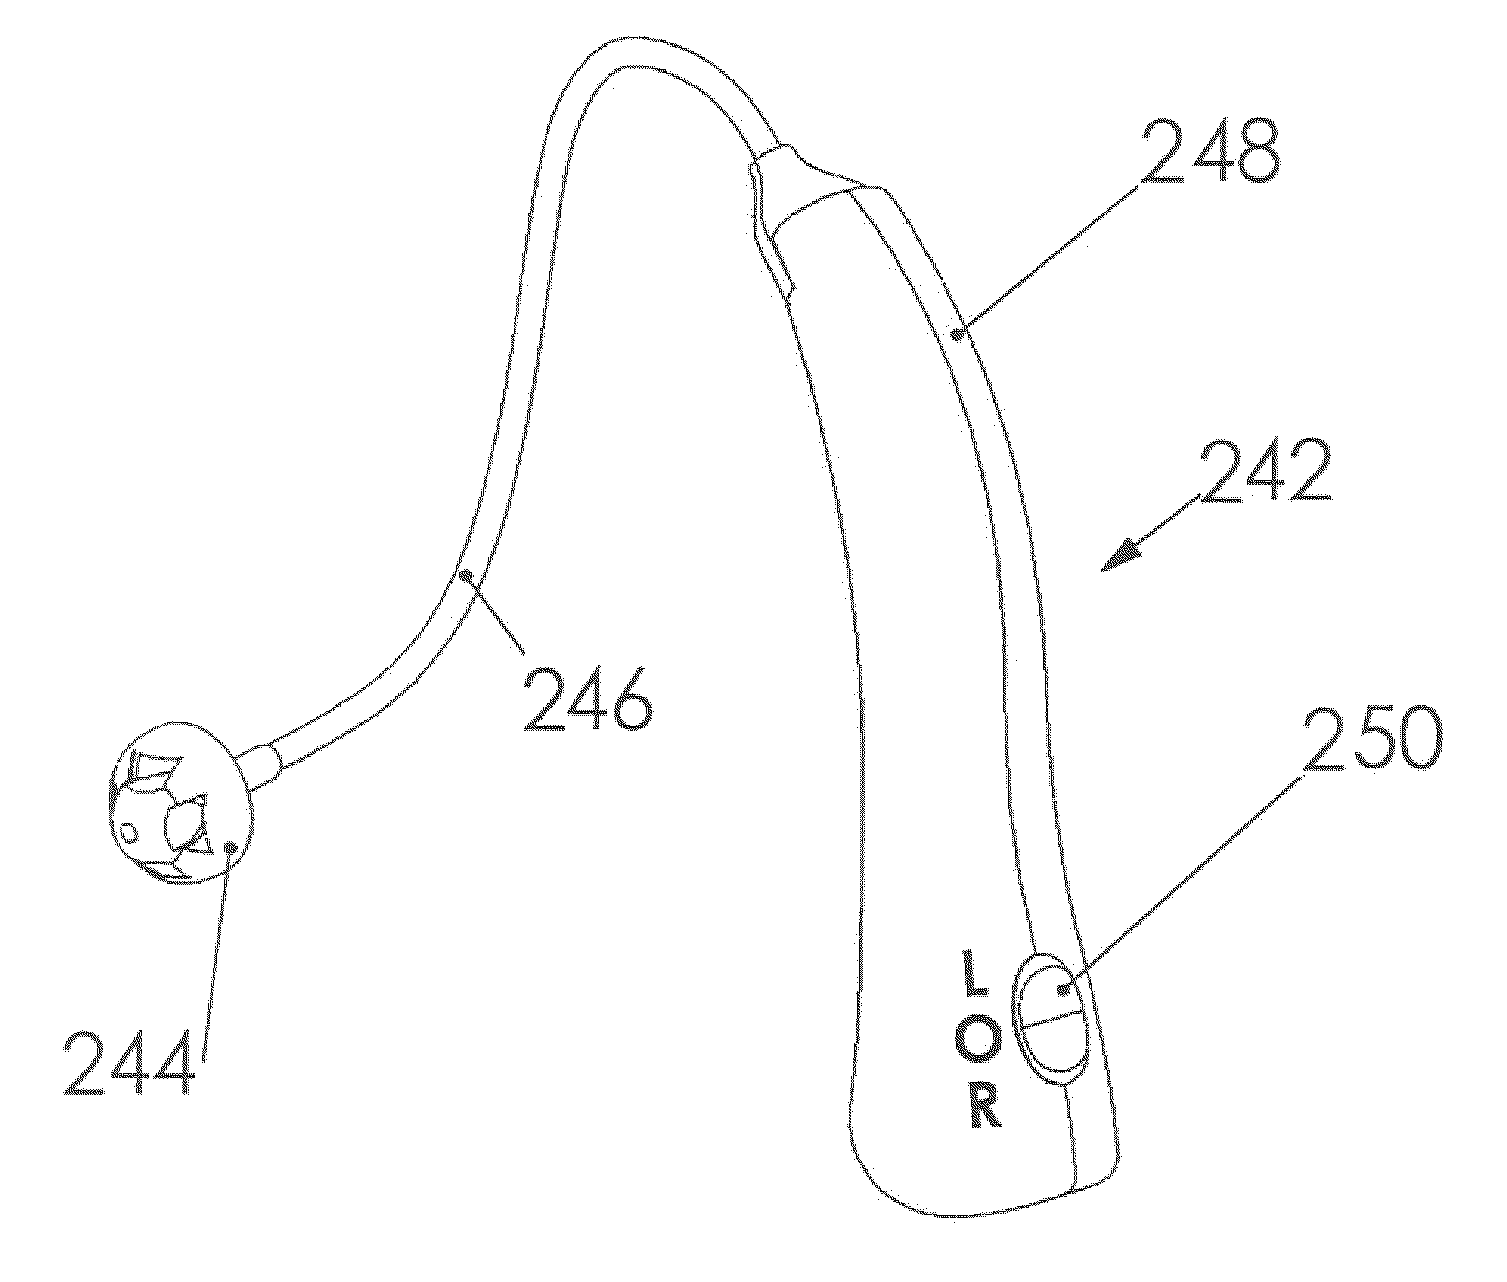 Personal listening device with automatic sound equalization and hearing testing